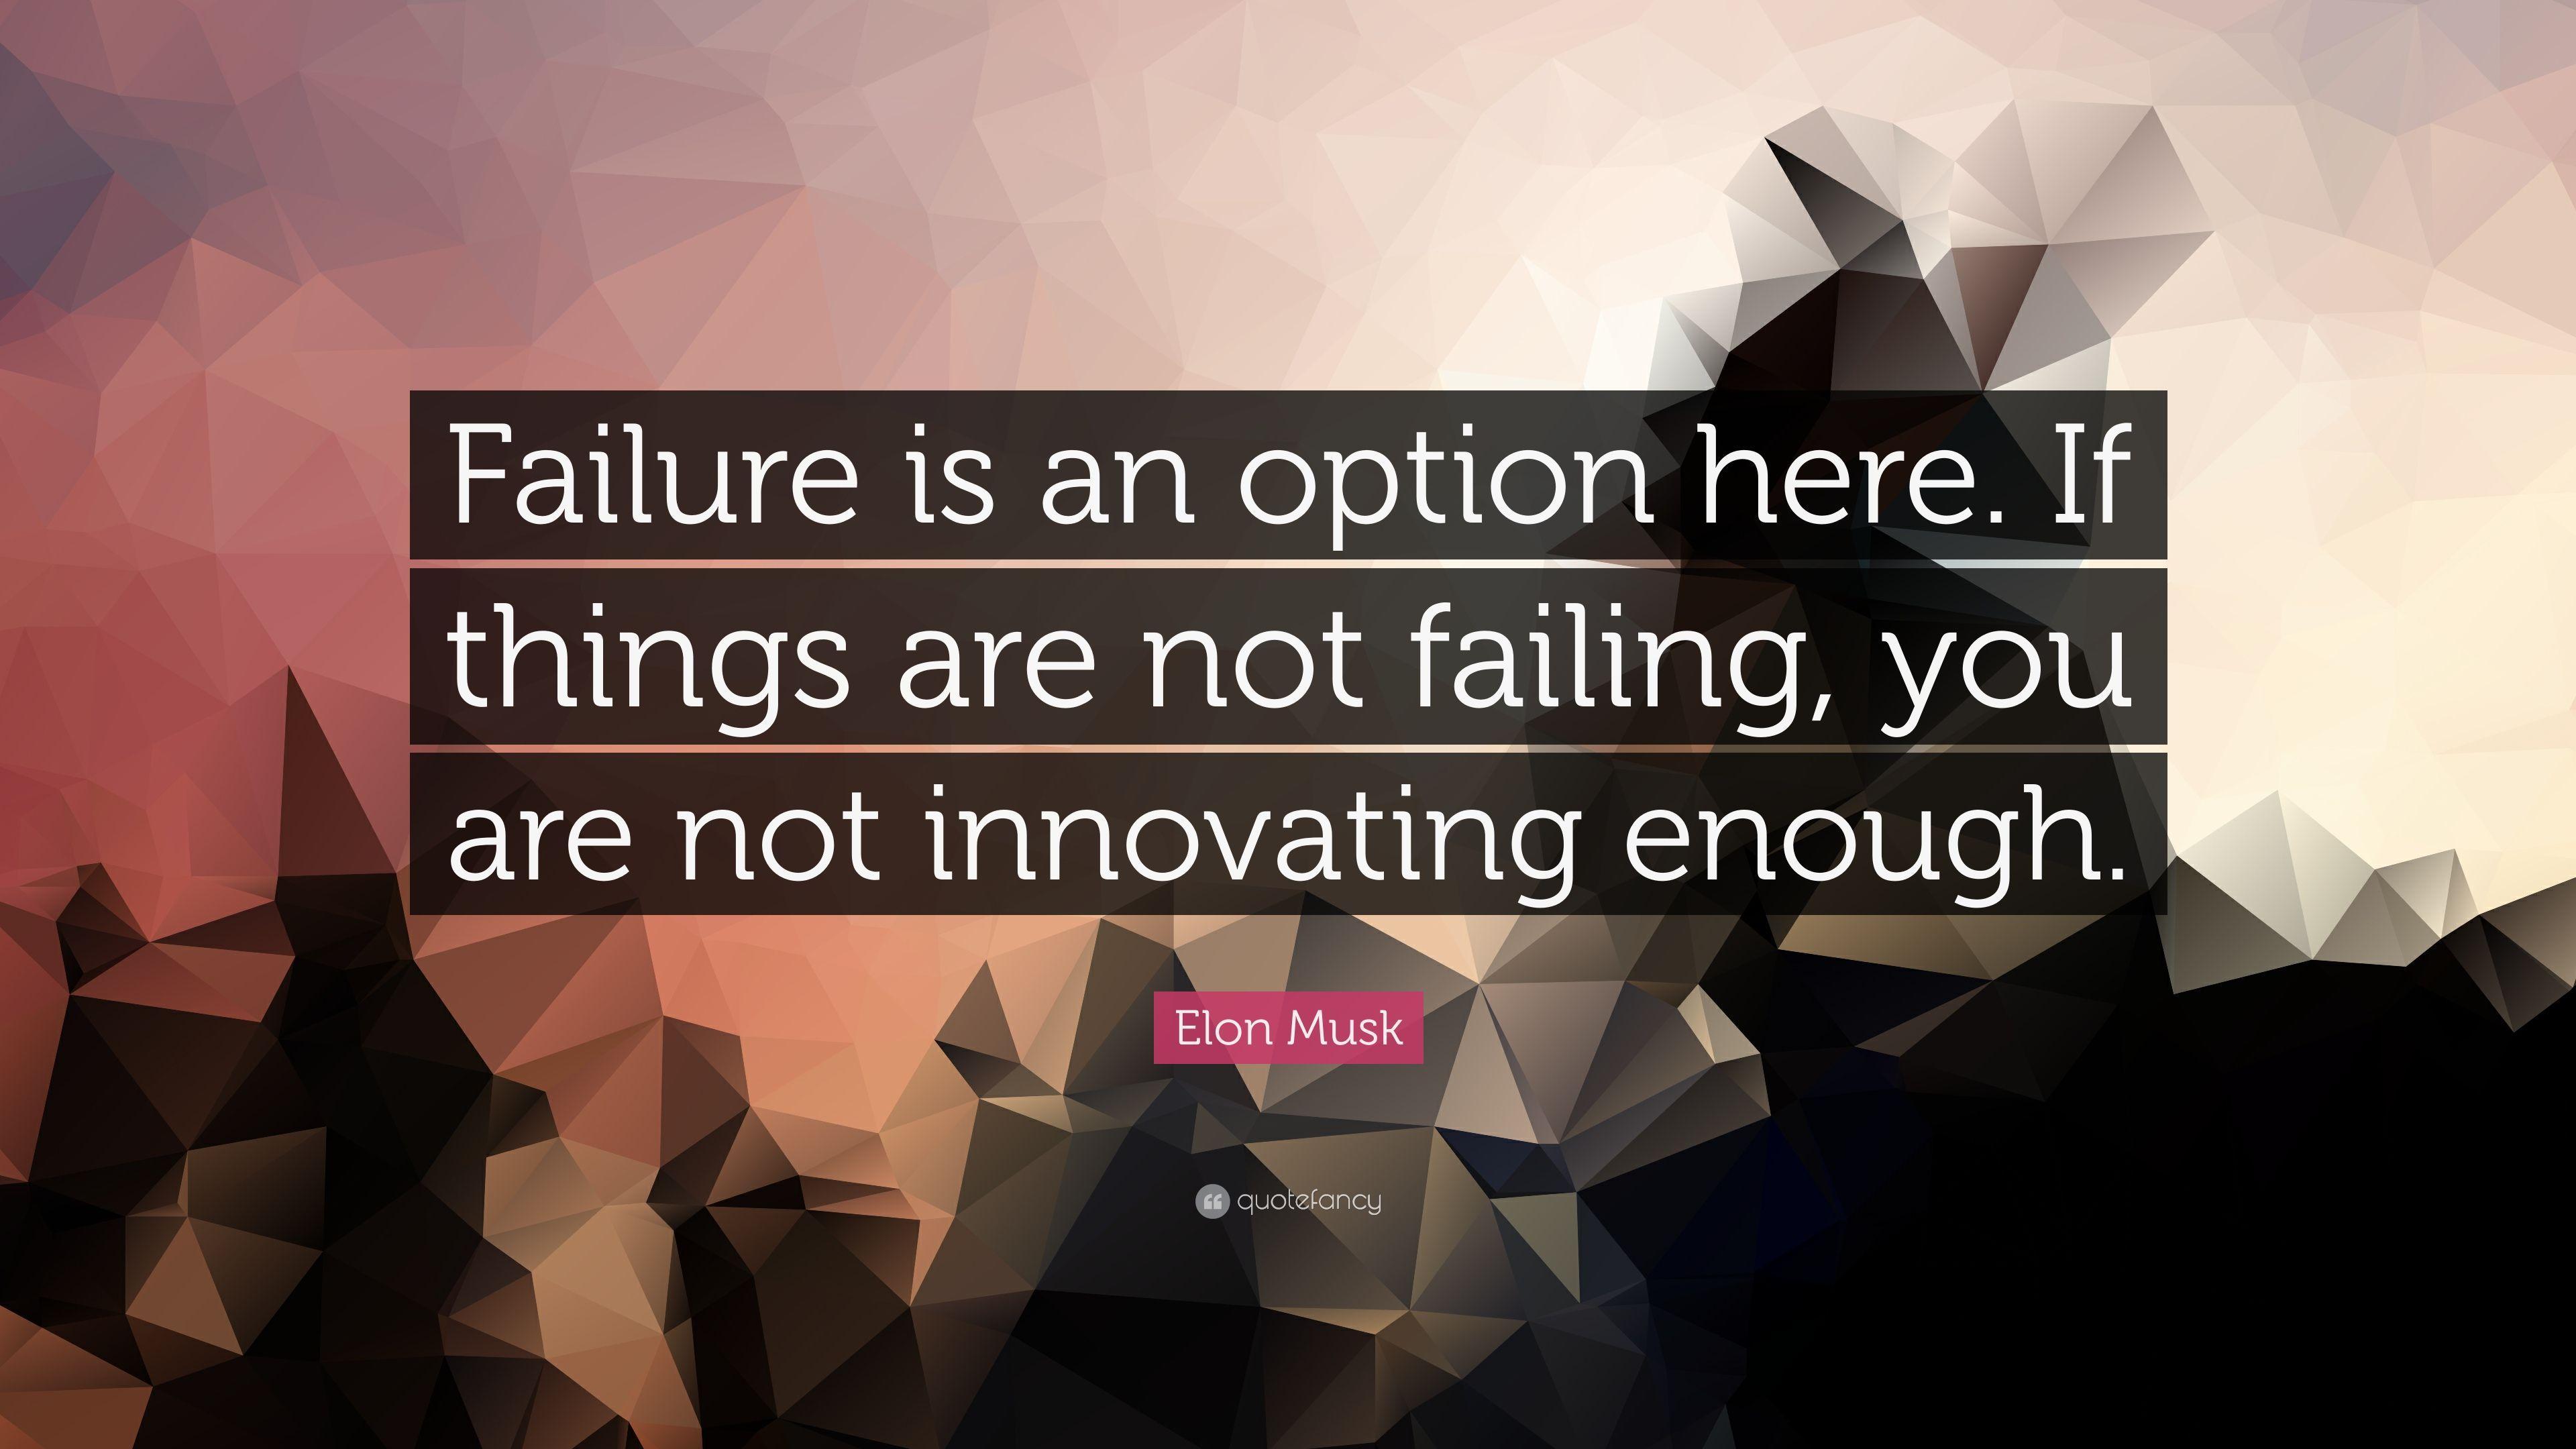 Elon Musk Quote: “Failure is an option here. If things are not